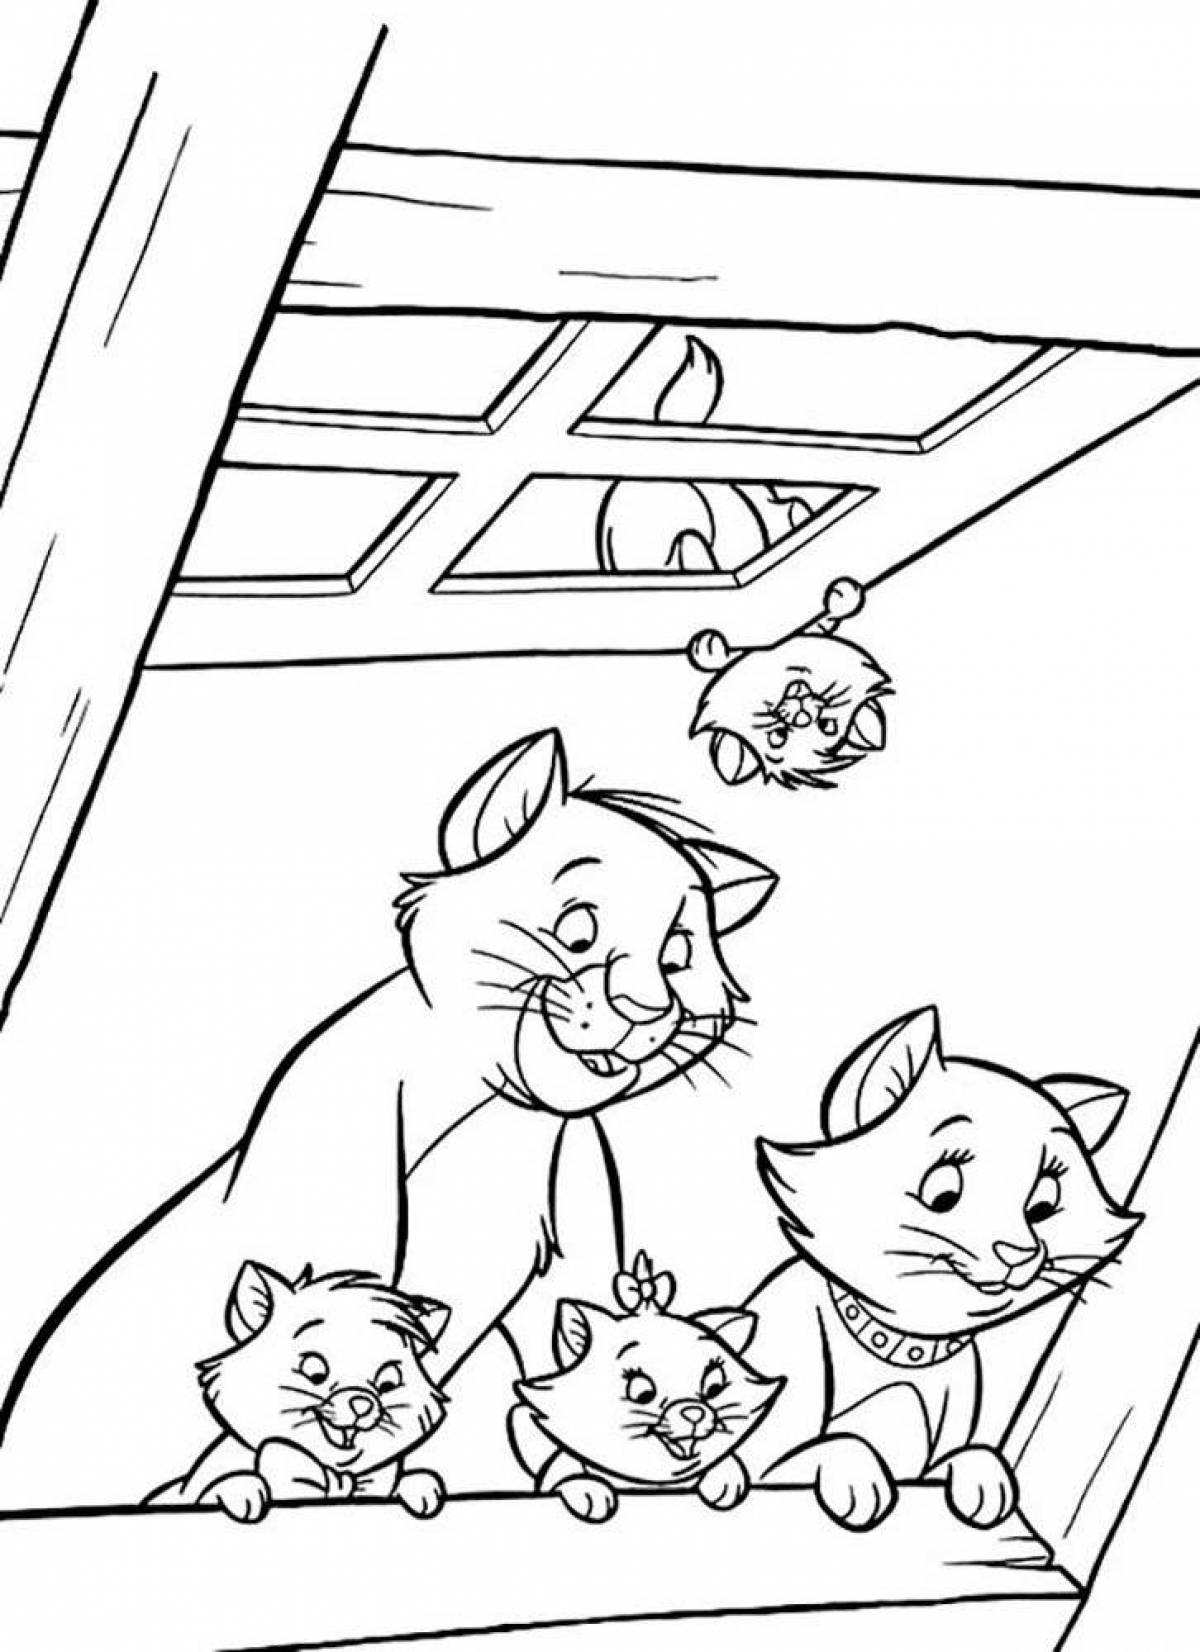 Three kittens coloring book